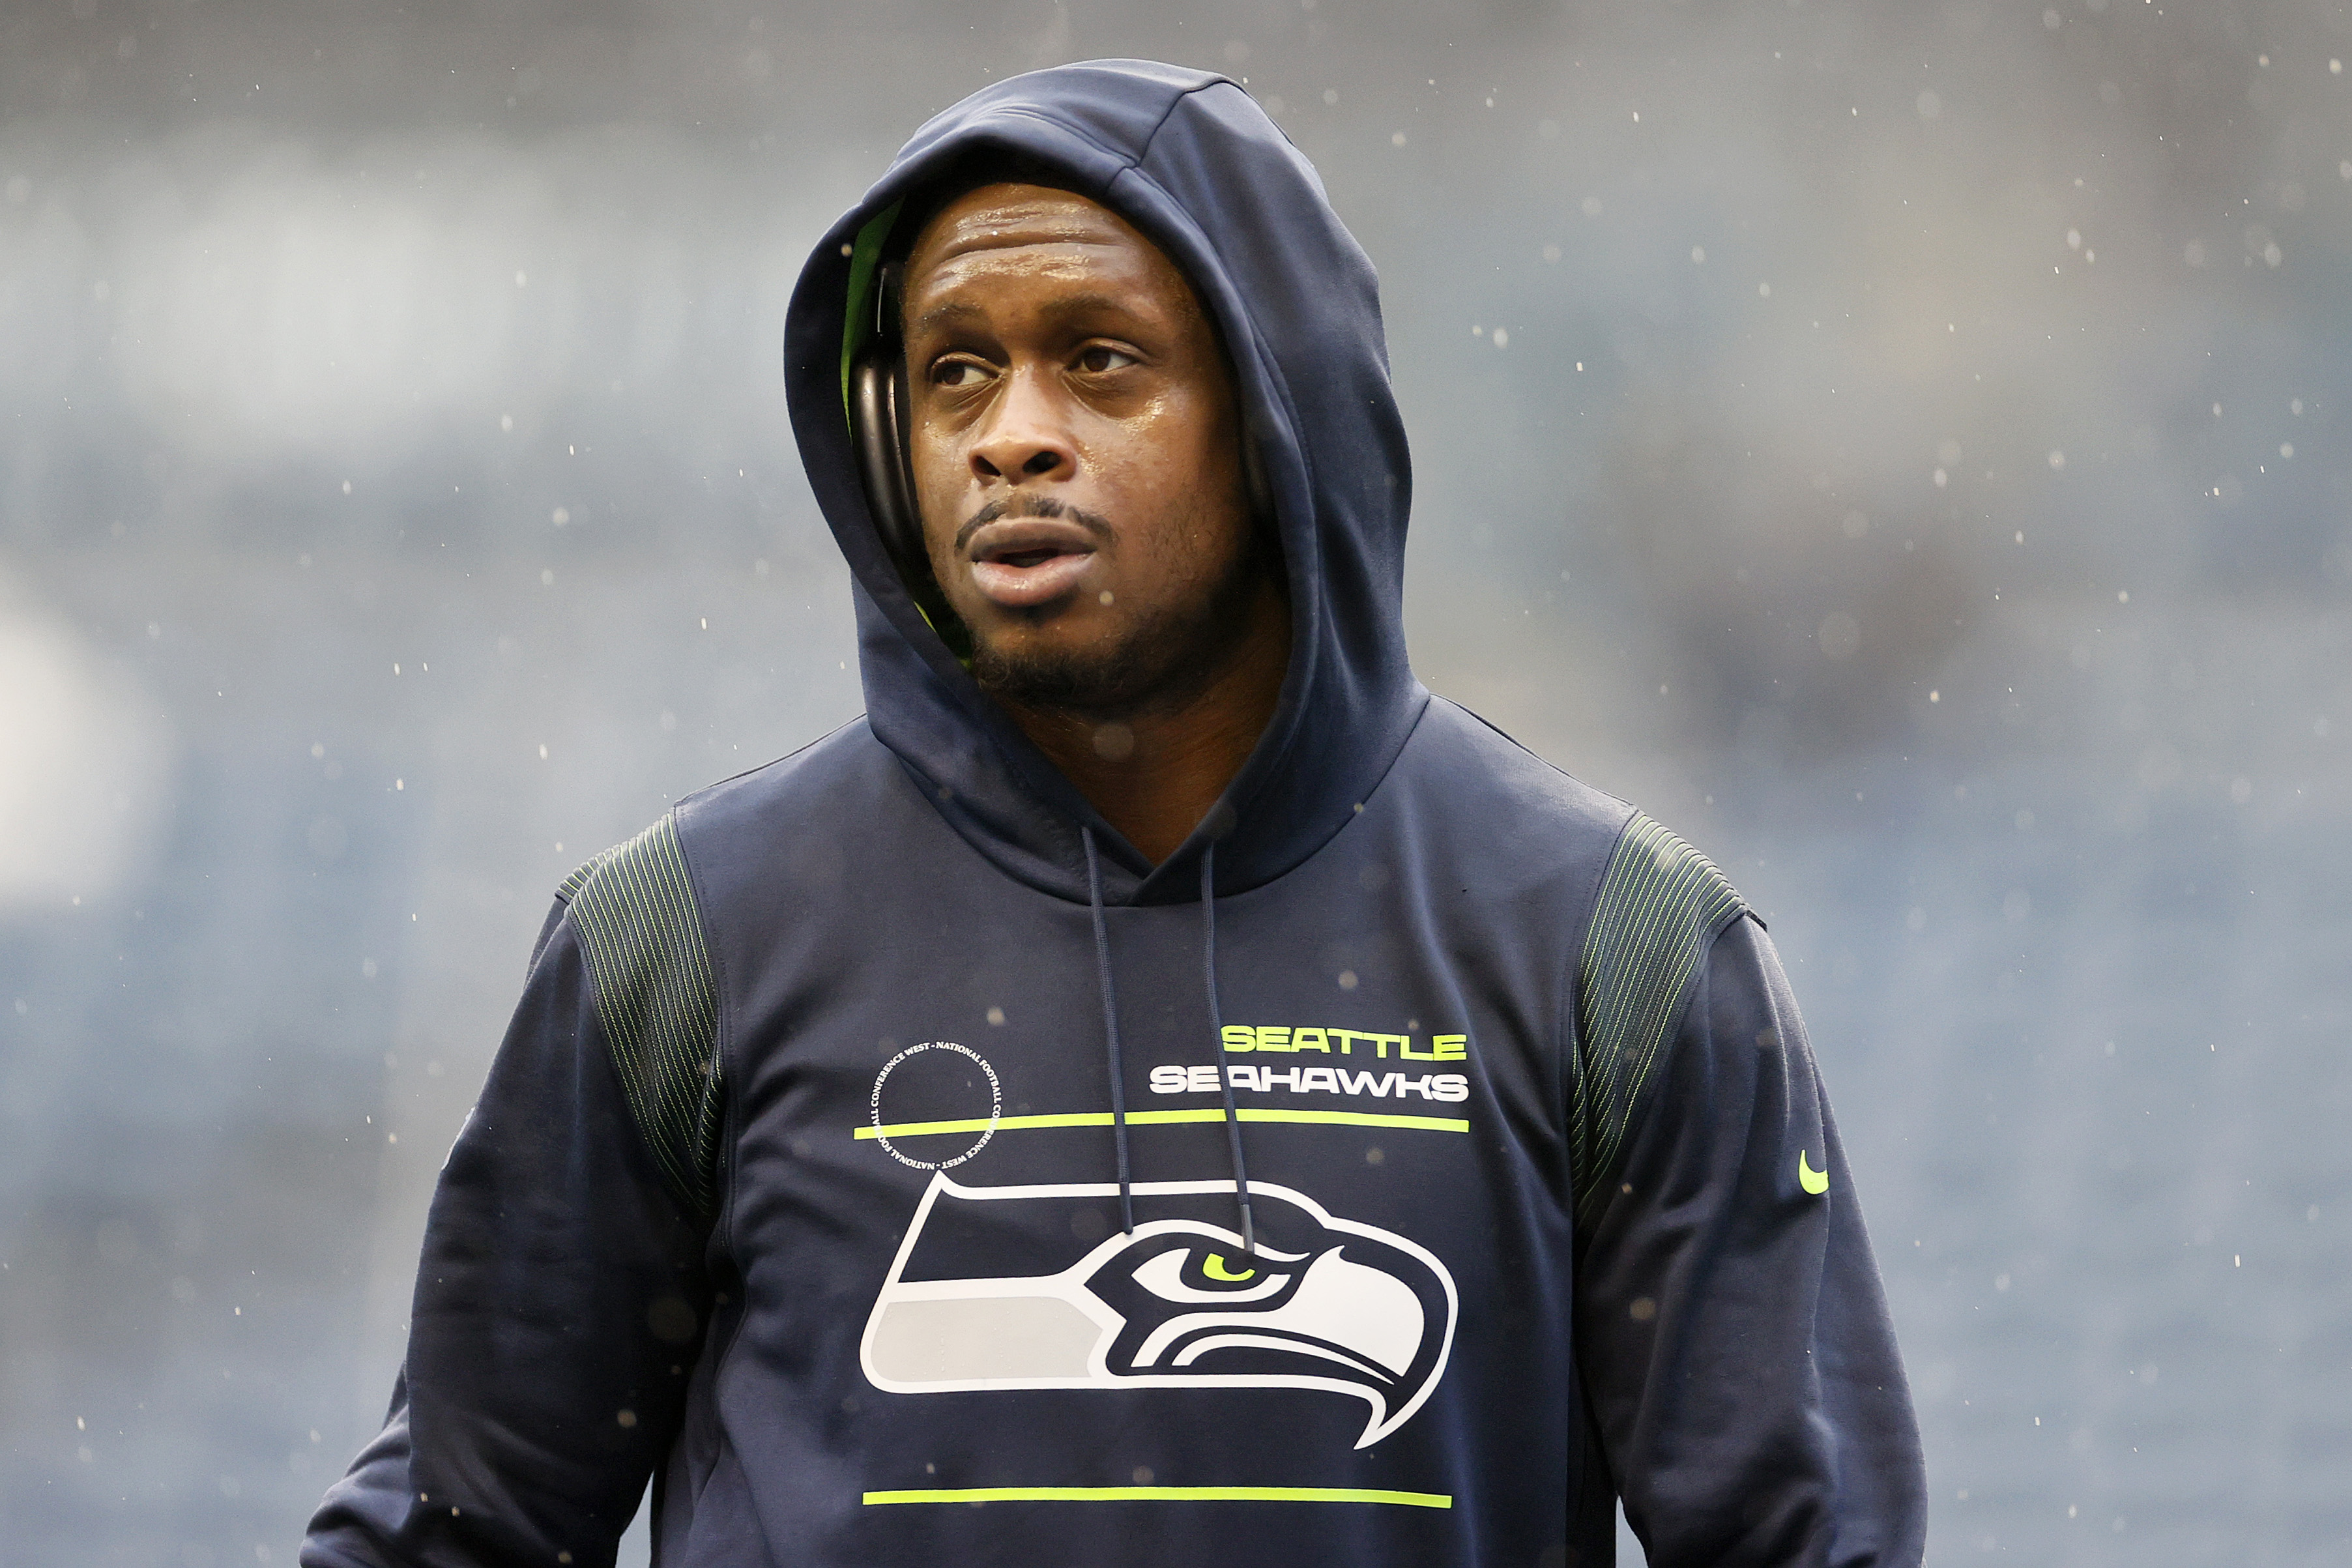 Seahawks QB Geno Smith Arrested for DUI After Going 36 MPH Over Speed